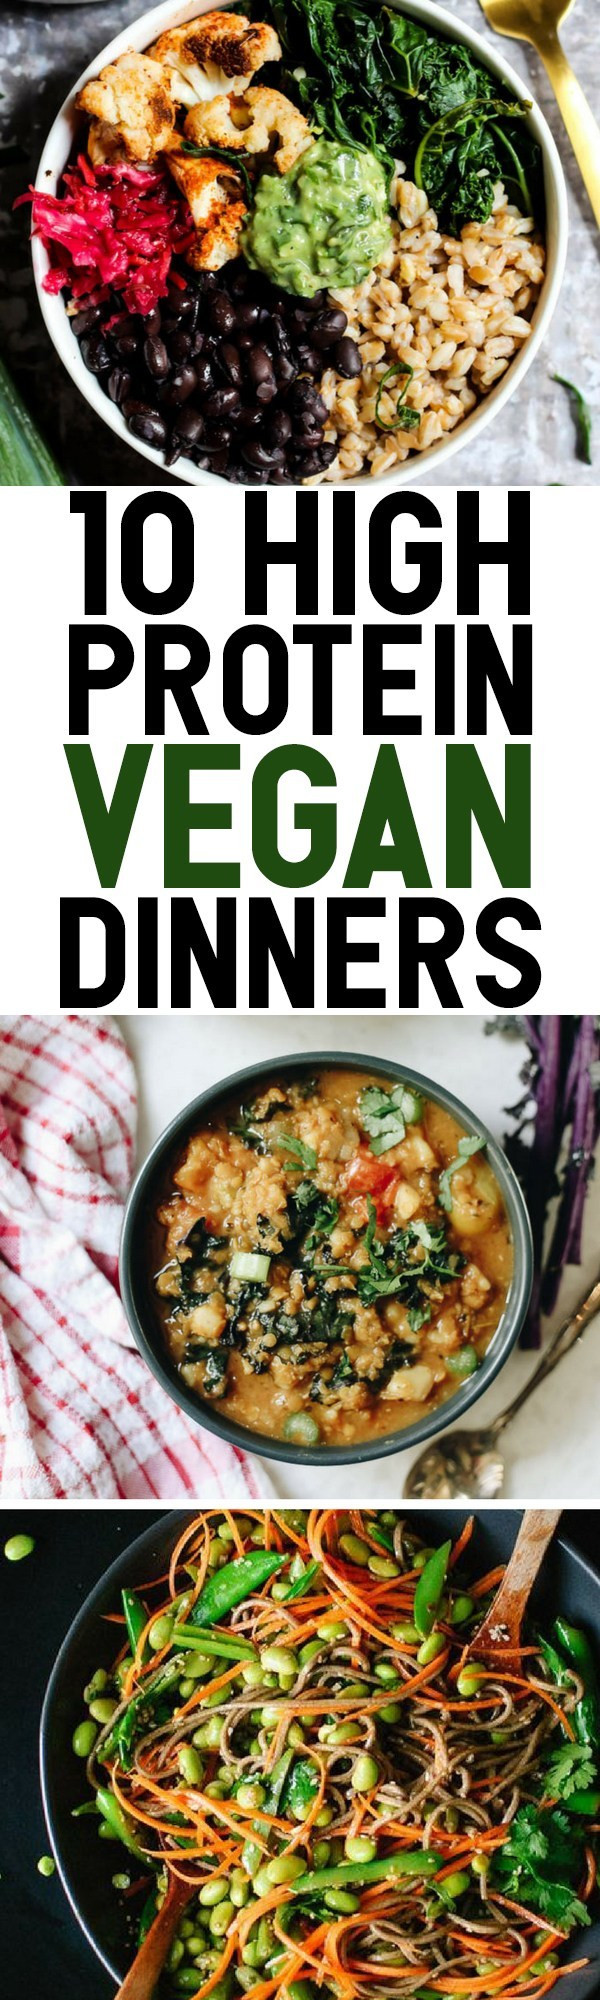 Vegetarian Dinners With Protein
 10 High Protein Vegan Dinners